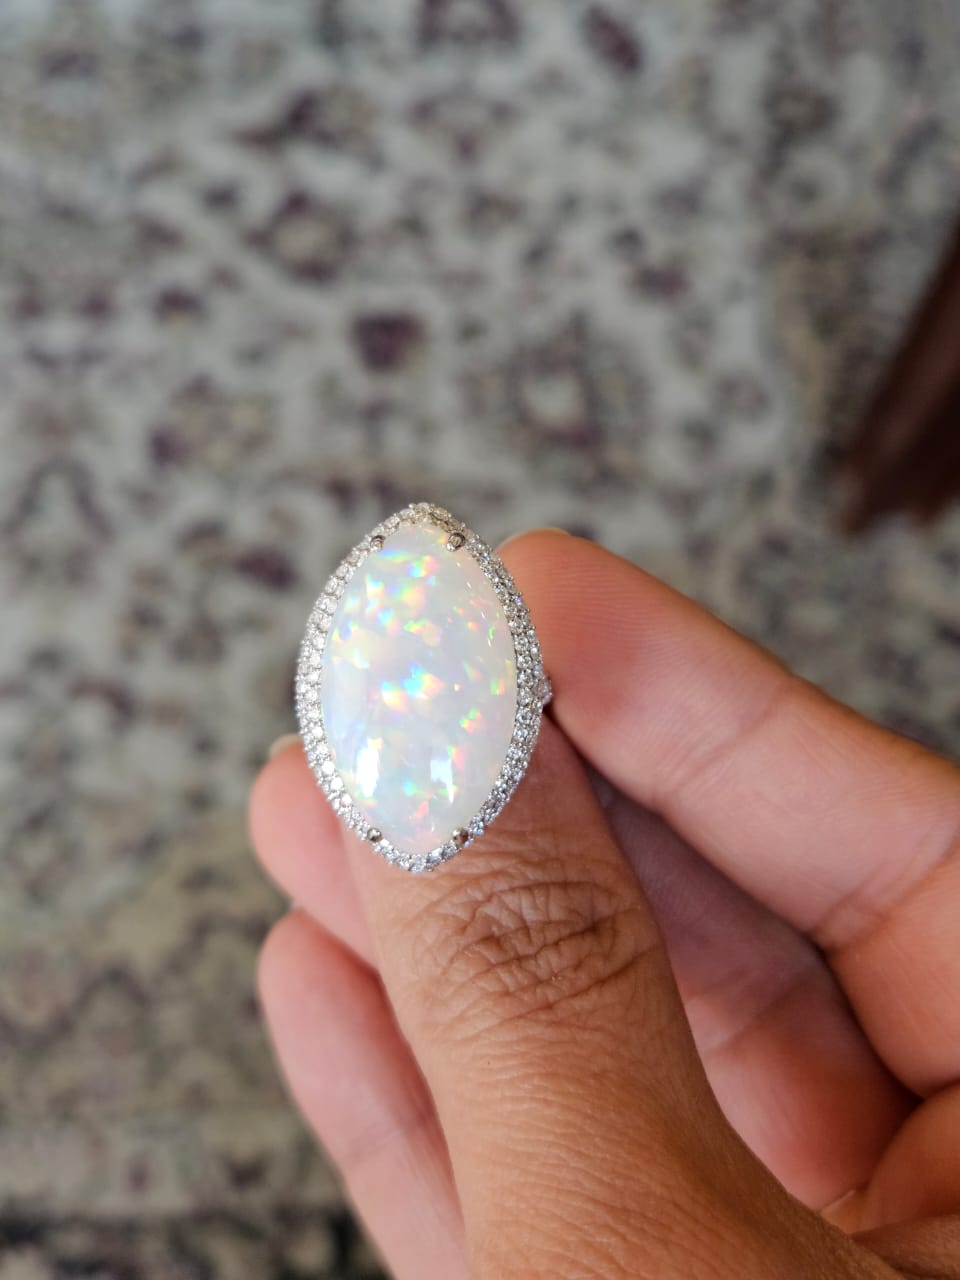 A very unique and beautiful, Opal Dome Cocktail Ring set in 18K White Gold & Diamonds. The weight of the Marquise shaped Opal Cabochon is 16.01 carats. The Opal is of Ethiopian origin. The Diamonds weight is 1.00 carats. Net 18K Gold weight is 6.32